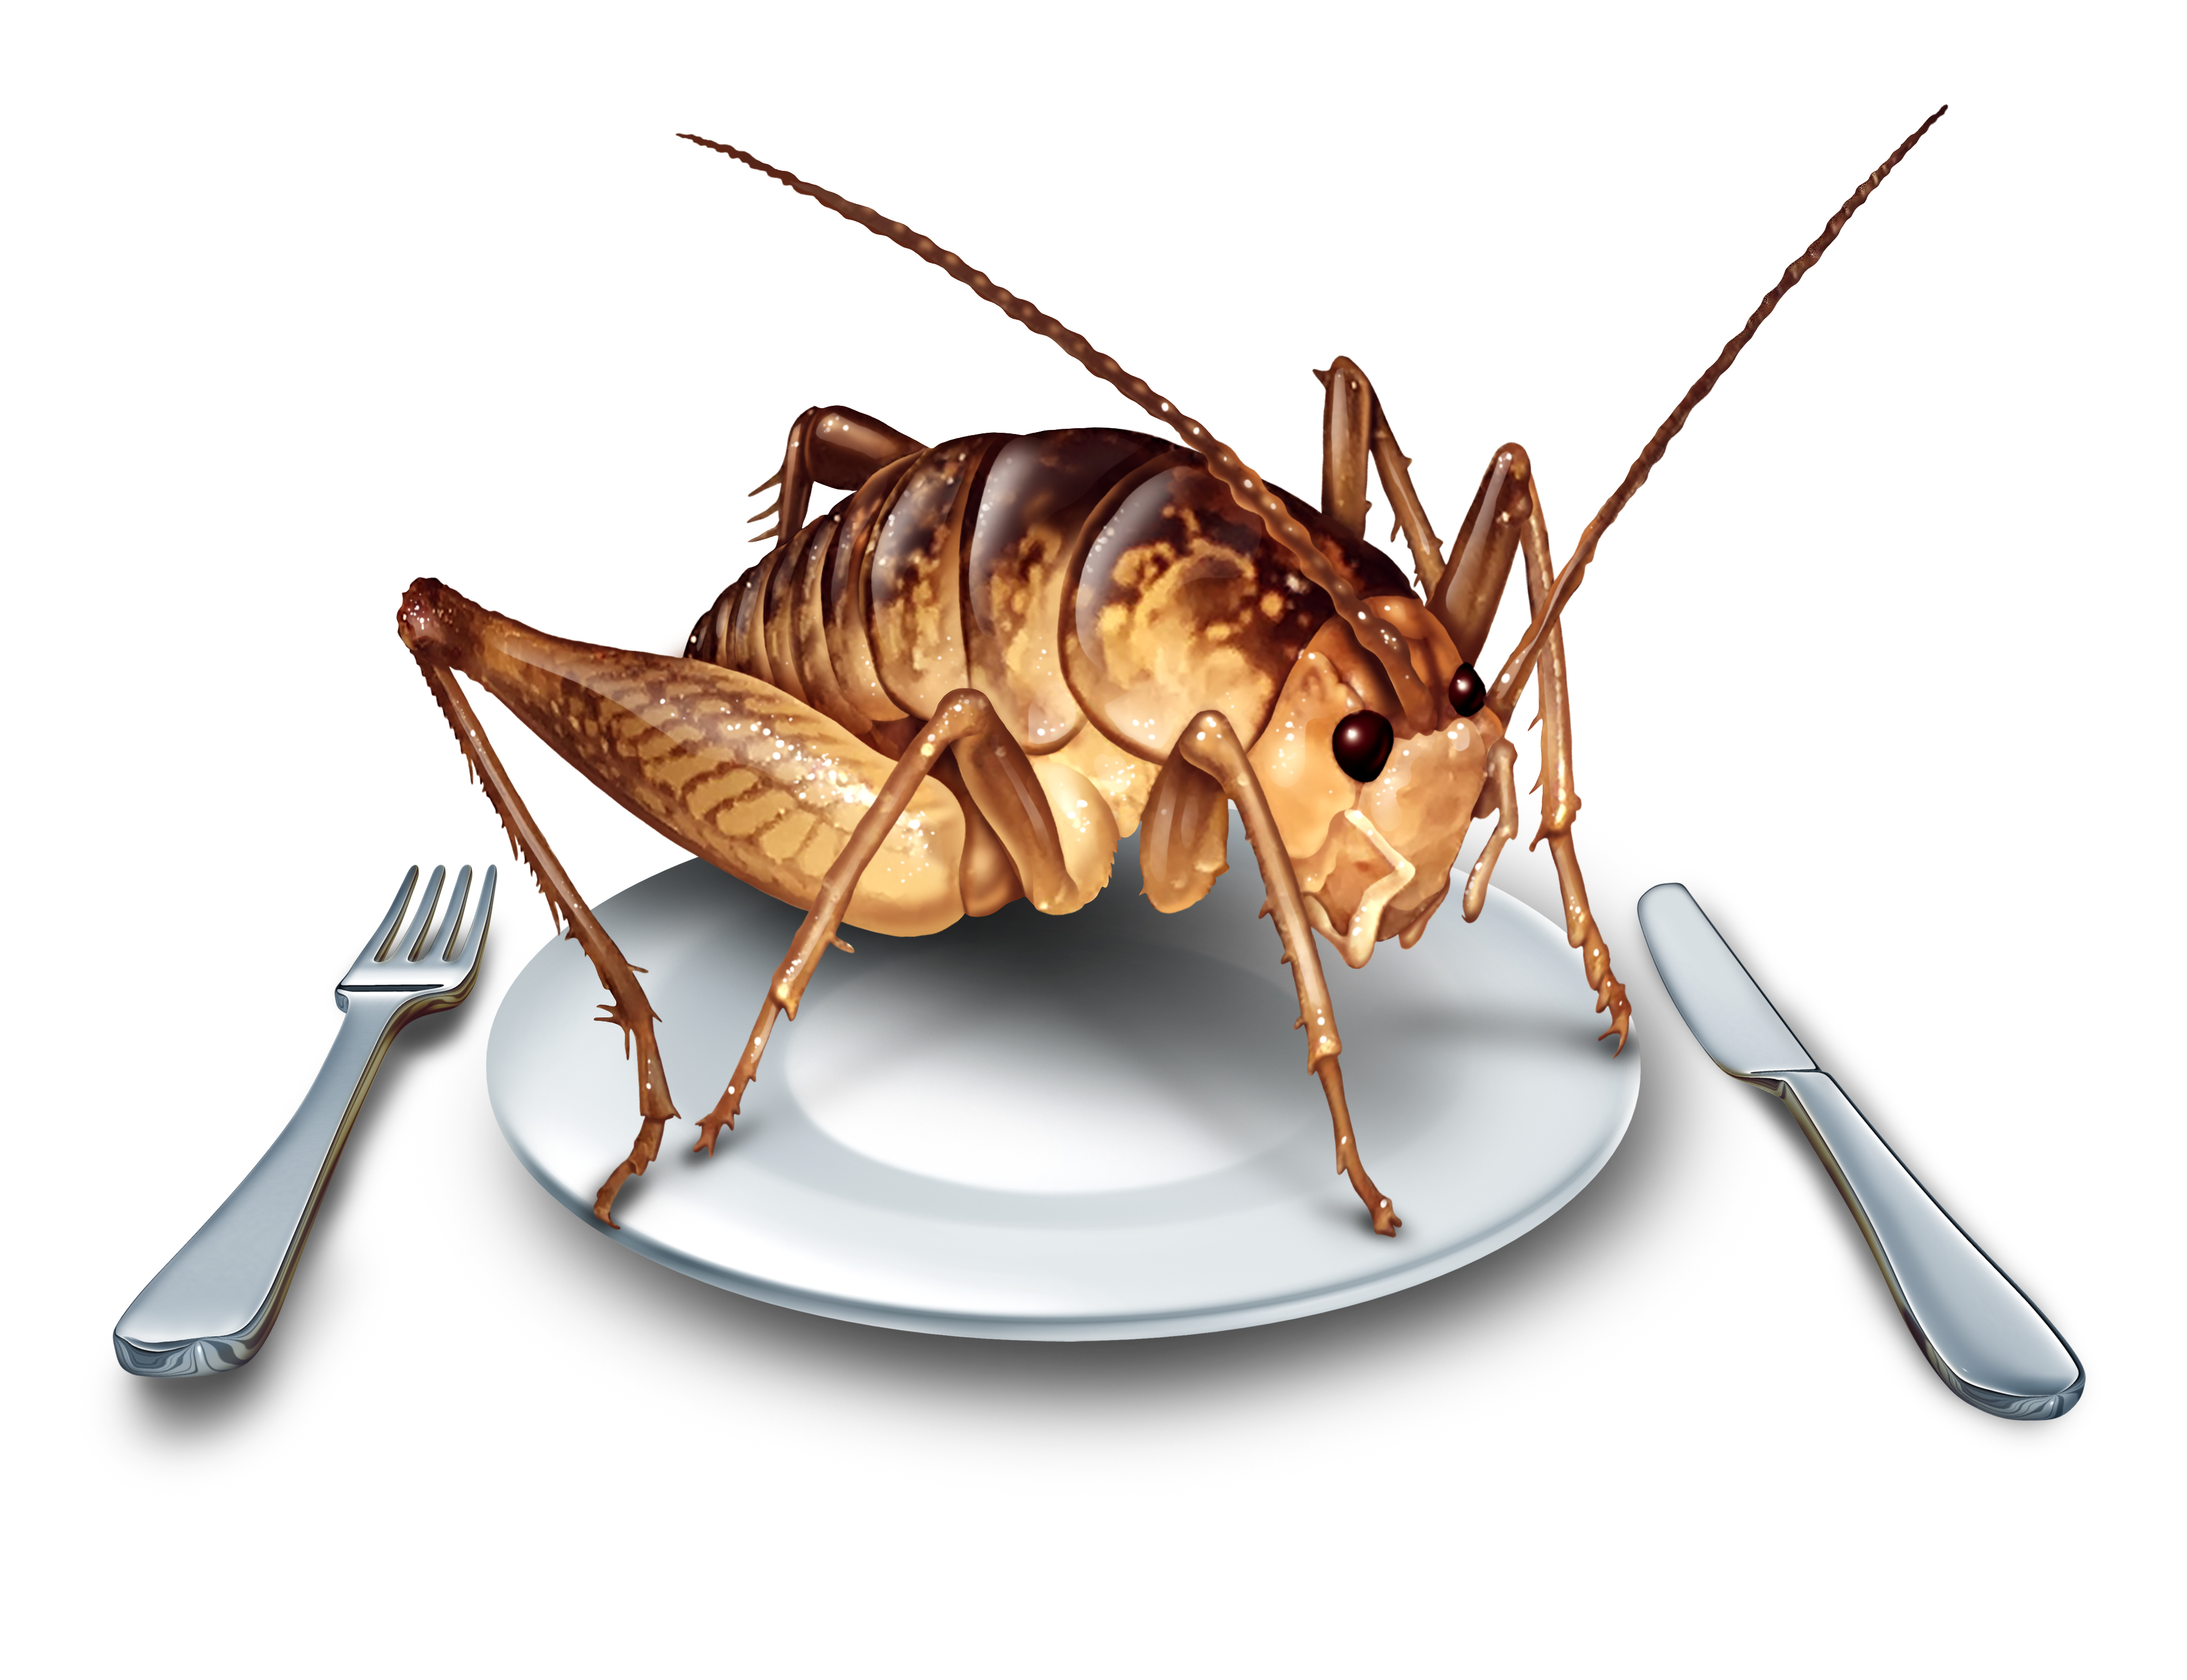 How to Keep Bugs off Your Food